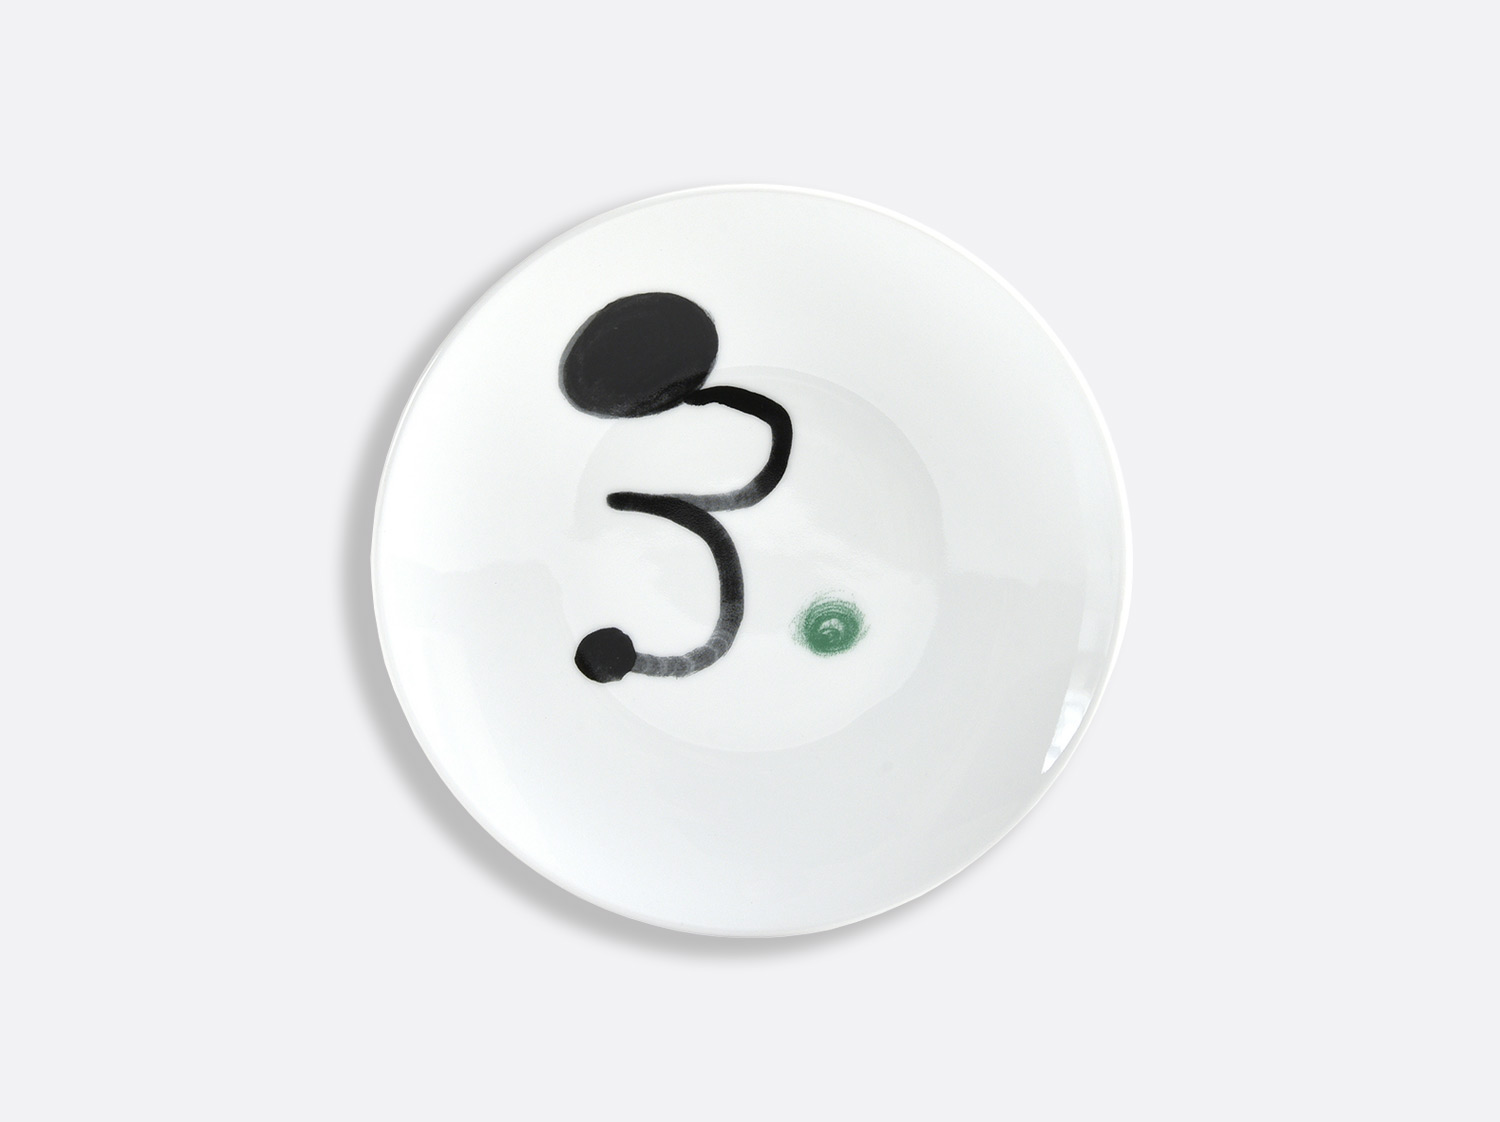 China 2 Bread and butter plates 16 cm Vert - Page 52 of the collection PARLER SEUL - Joan Miro | Bernardaud